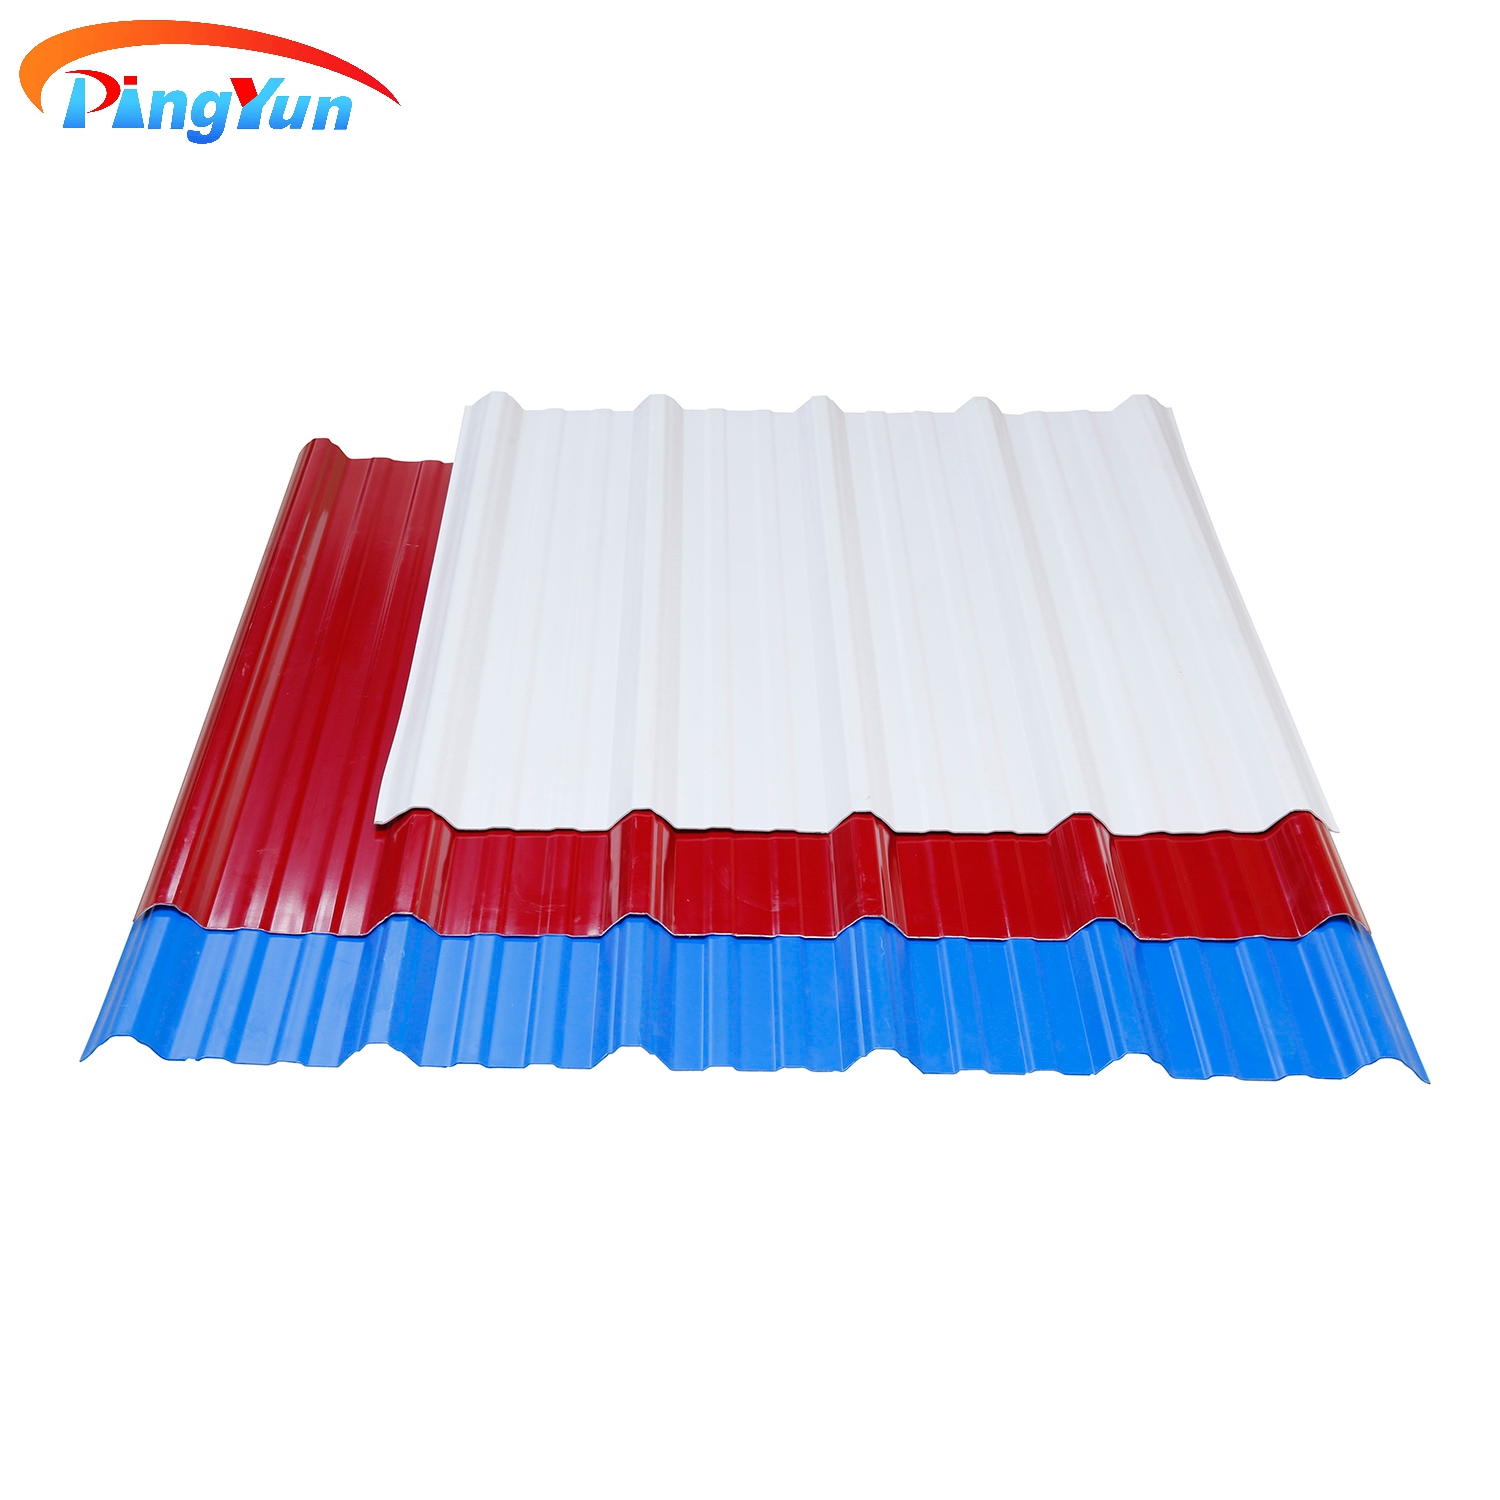 UPVC construction materials roof tiles PVC roofing tile for wall cladding